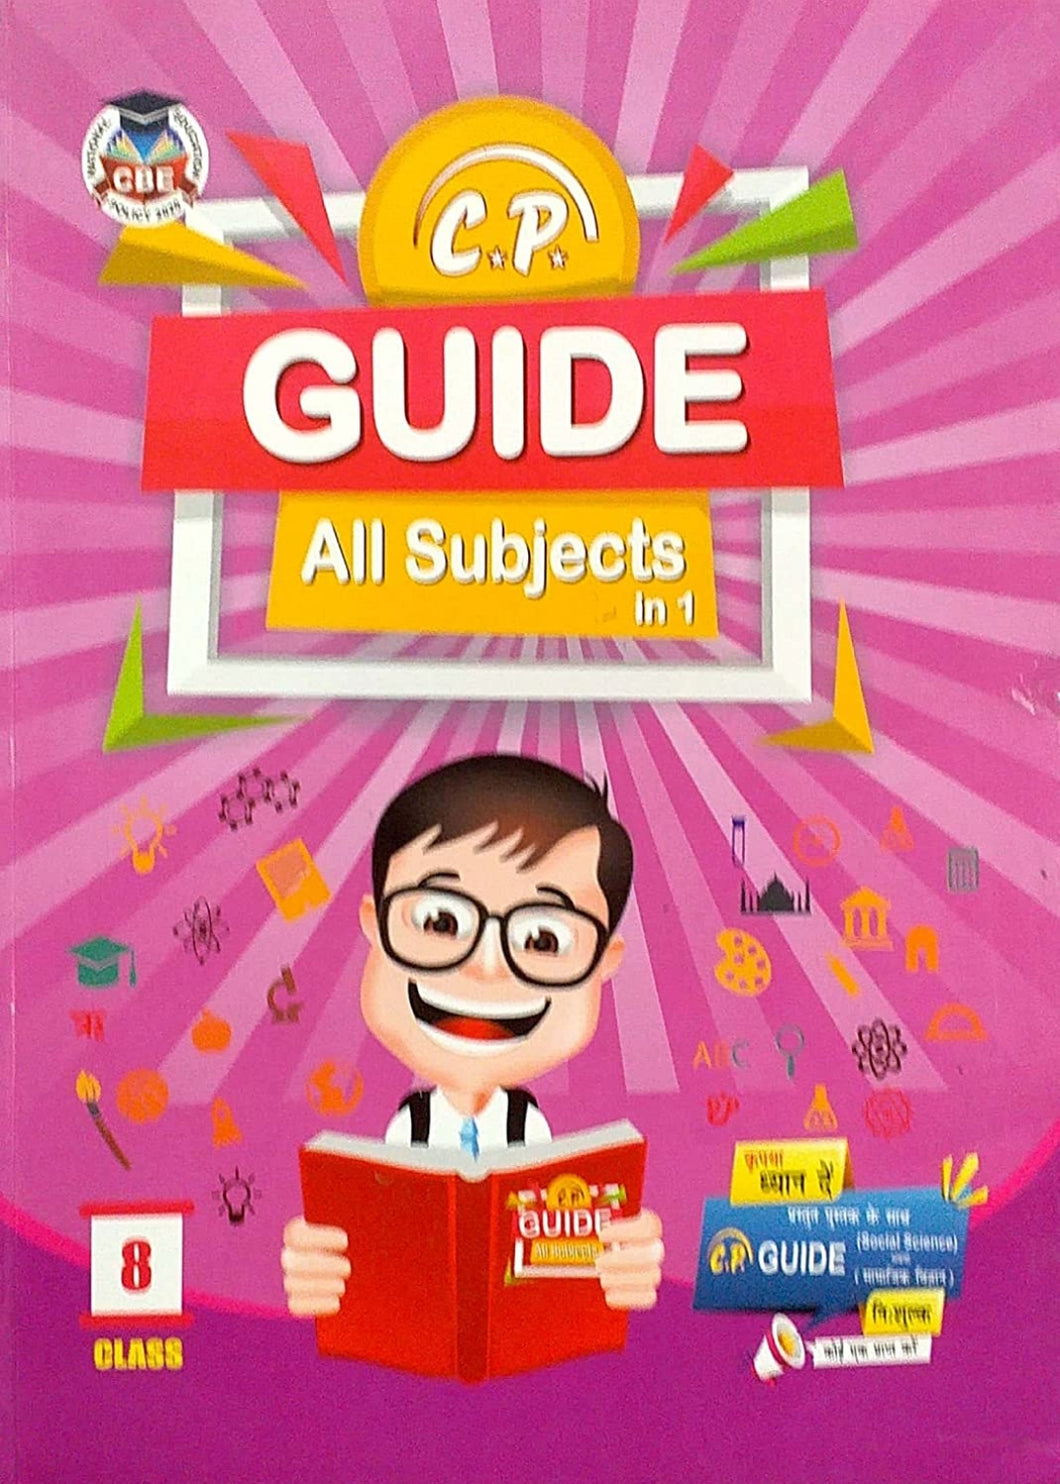 Class 8 Digest/Solution/Guide for all subjects Based On Latest NCERT Curriculum